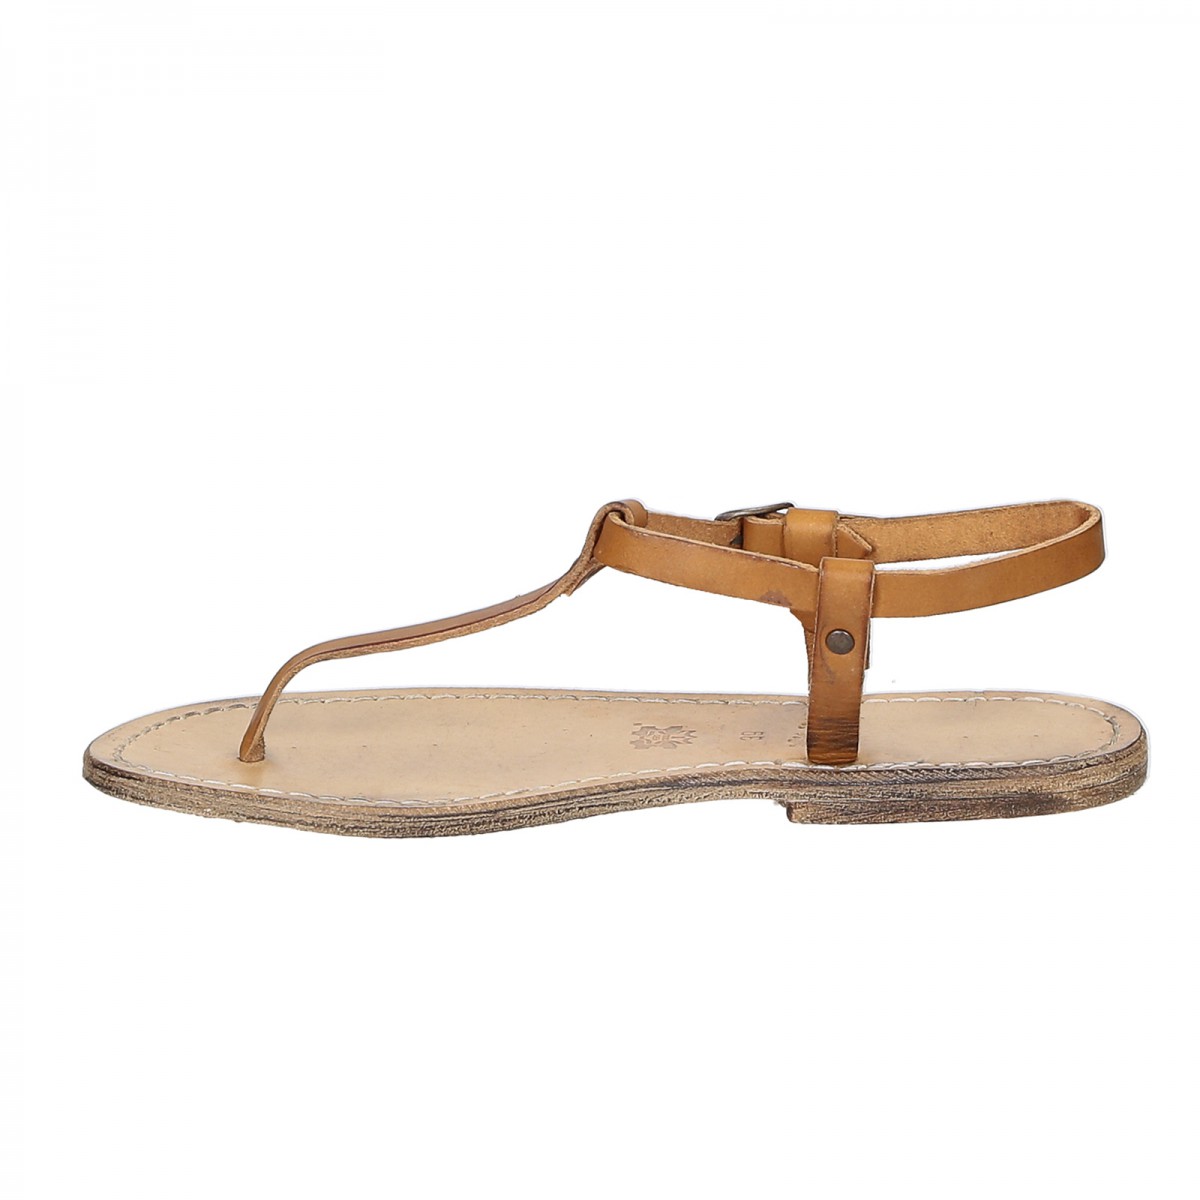 T-strap thong sandals in tan vintage Leather handmade in Italy ...